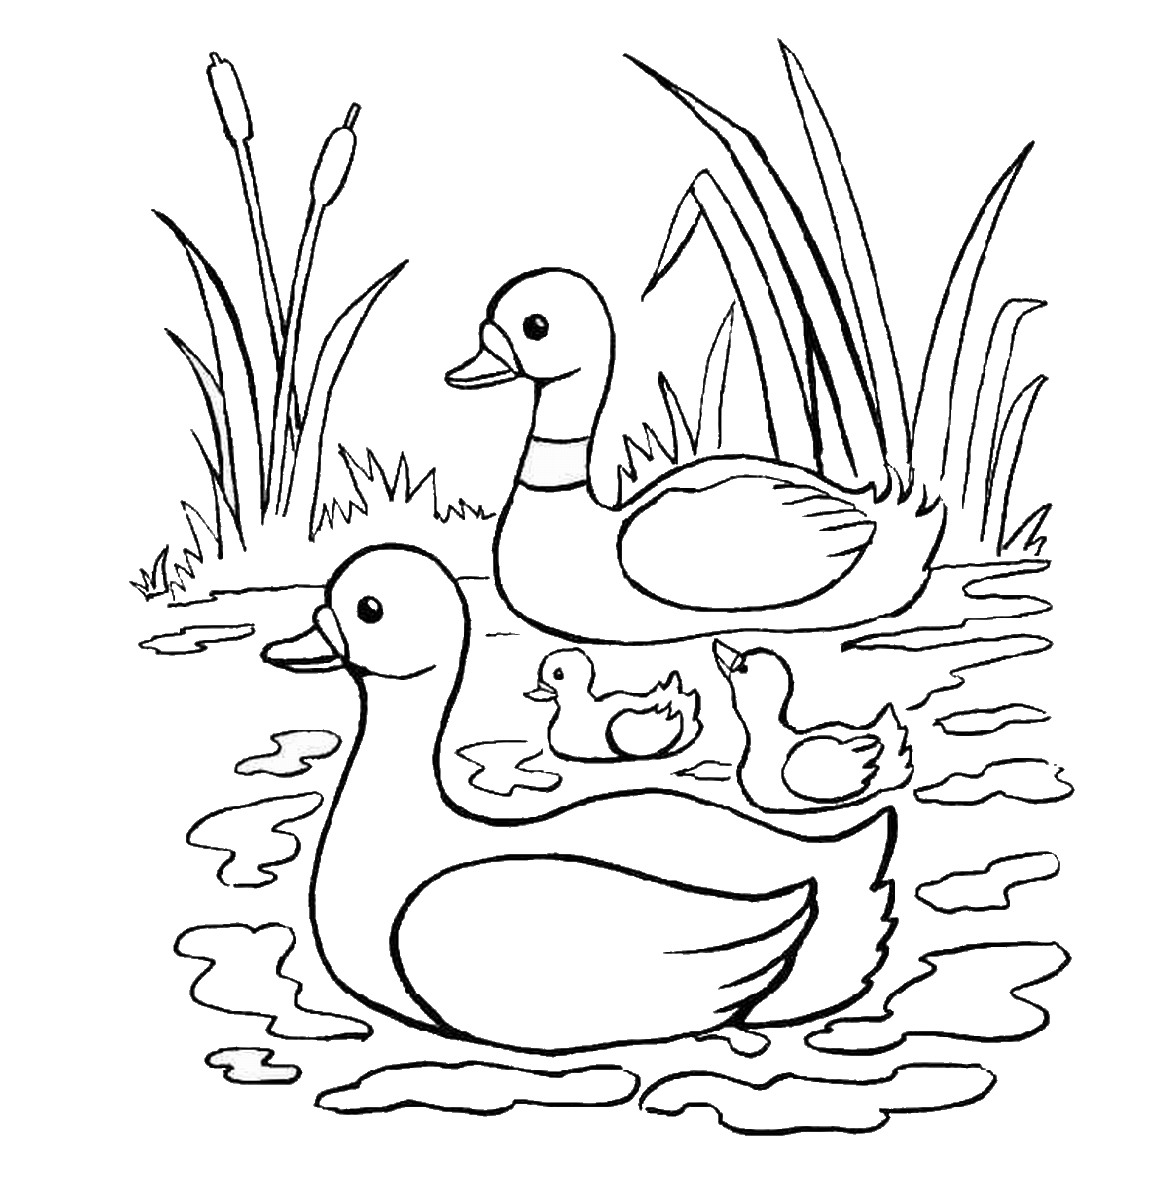 coloring book pictures of ducks printable duck coloring pages for kids cool2bkids coloring book pictures ducks of 